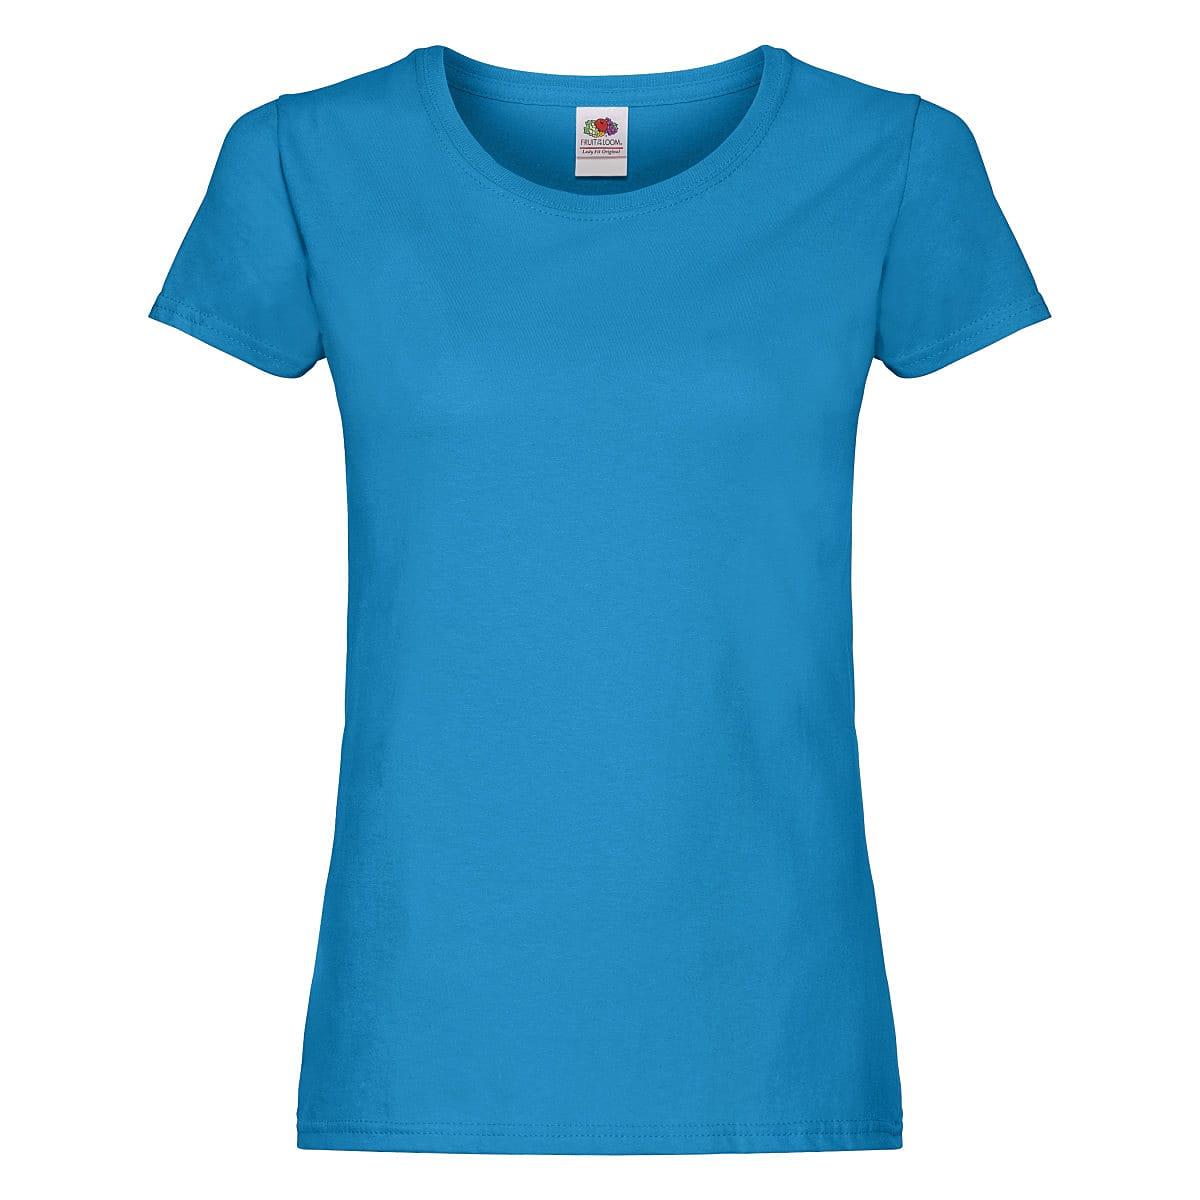 Fruit Of The Loom Lady Fit Original T-Shirt in Azure Blue (Product Code: 61420)